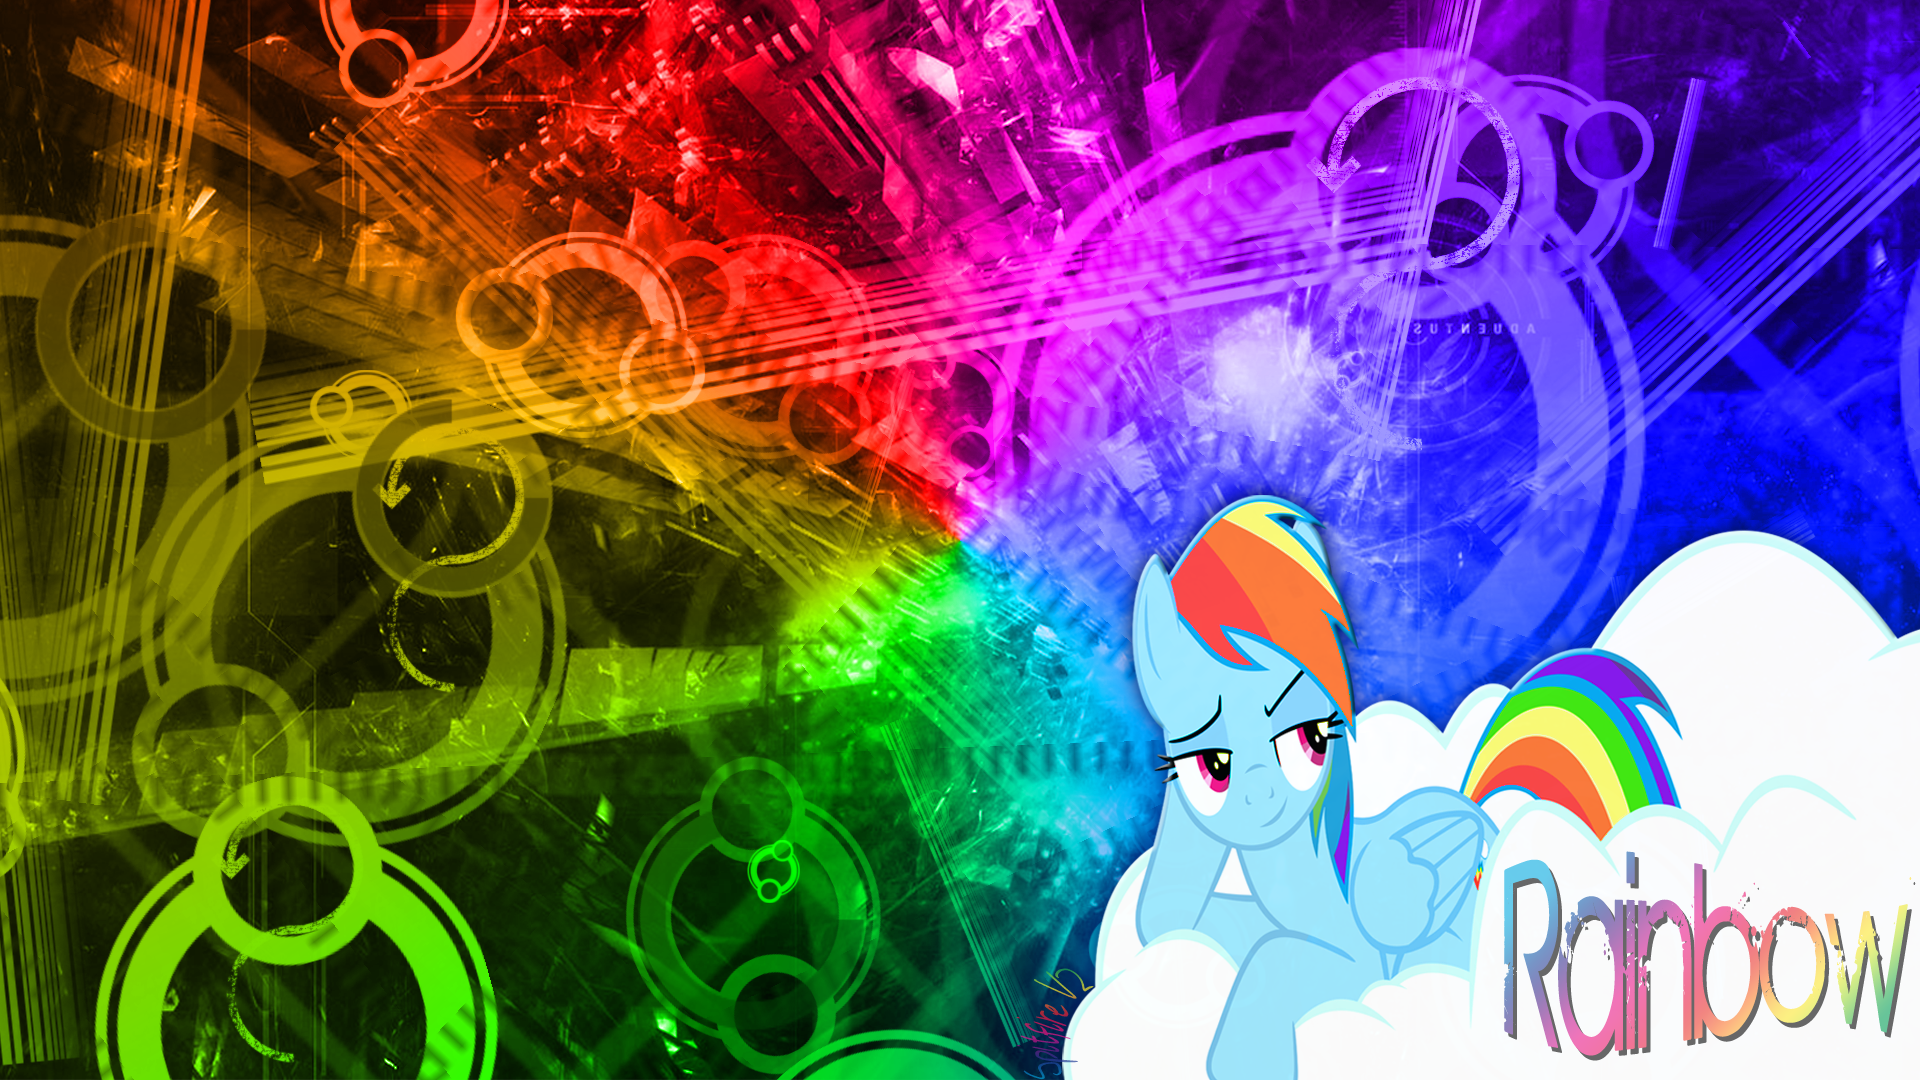 Rainbows, coolness and stuff by FknSpitfire and Santafer